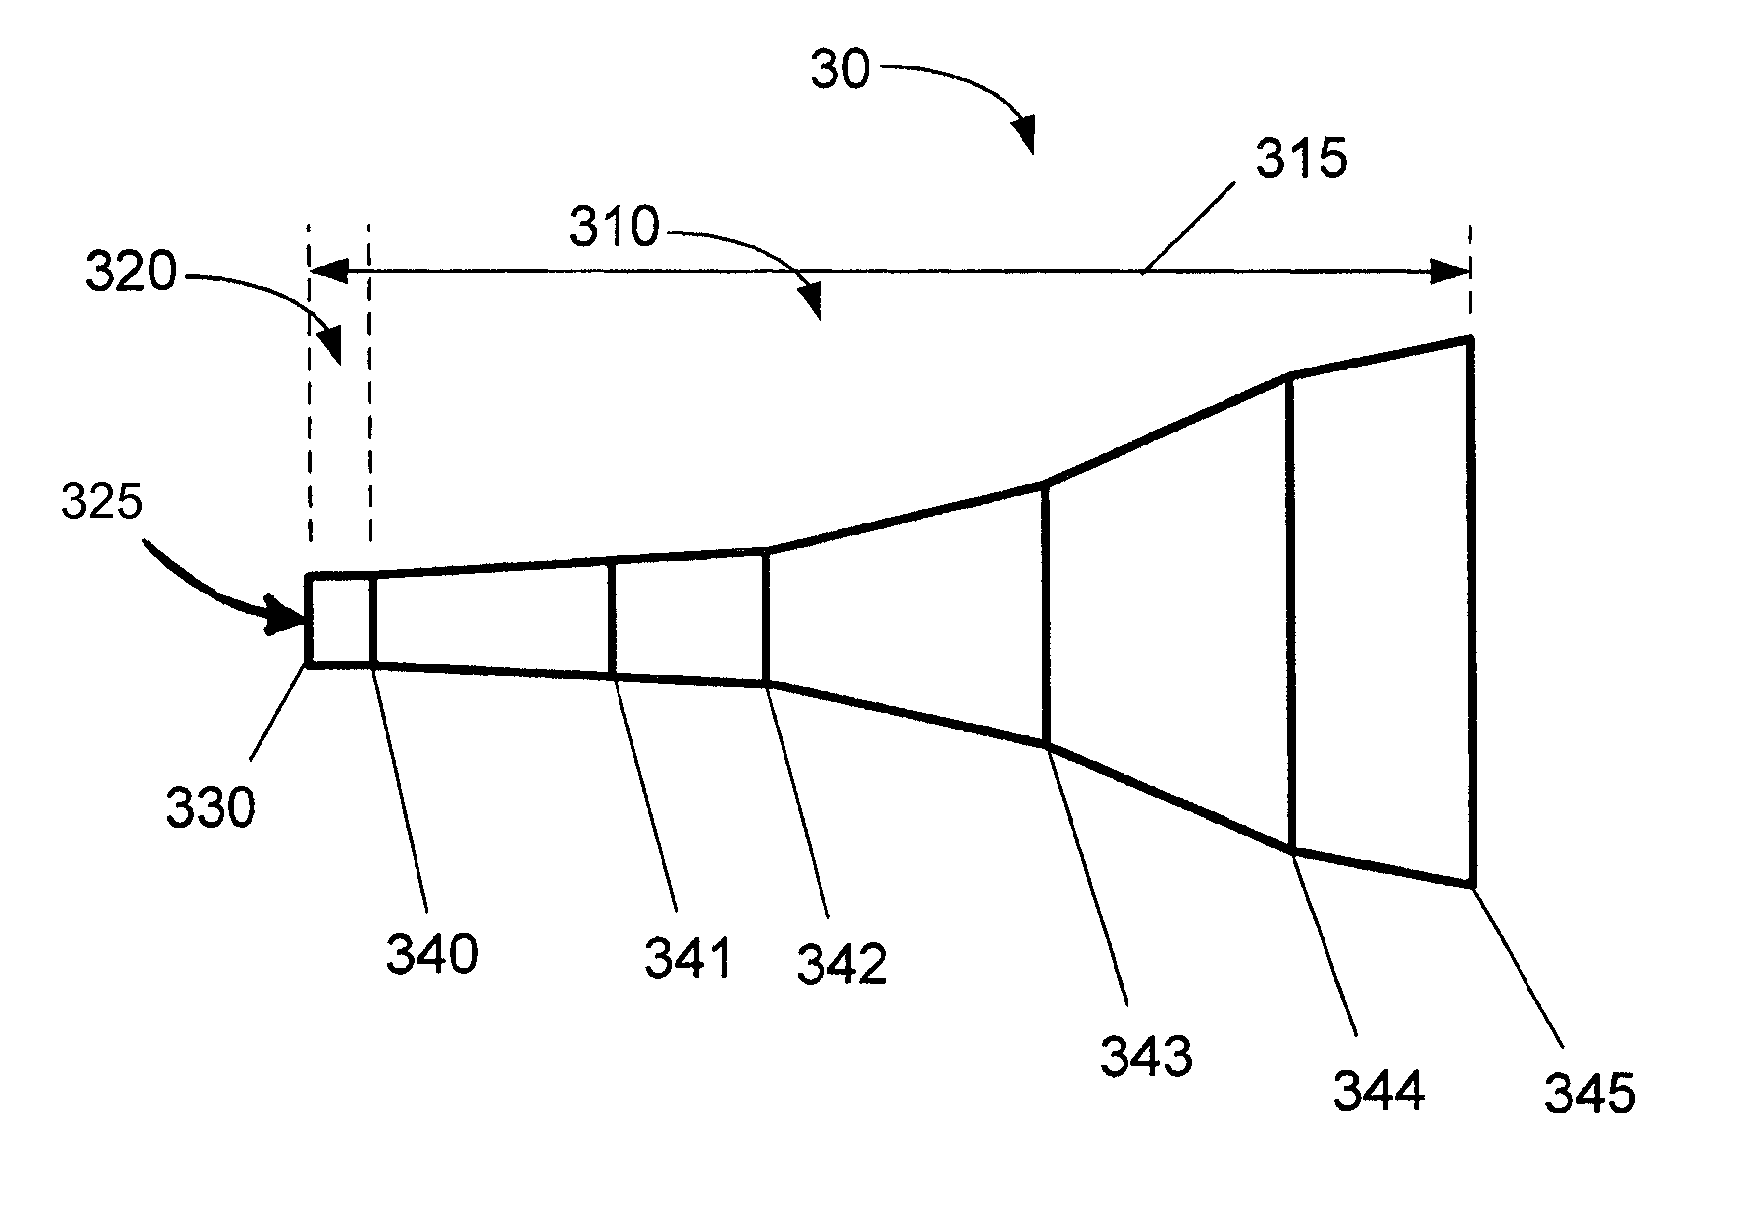 Dual-band feed horn with common beam widths